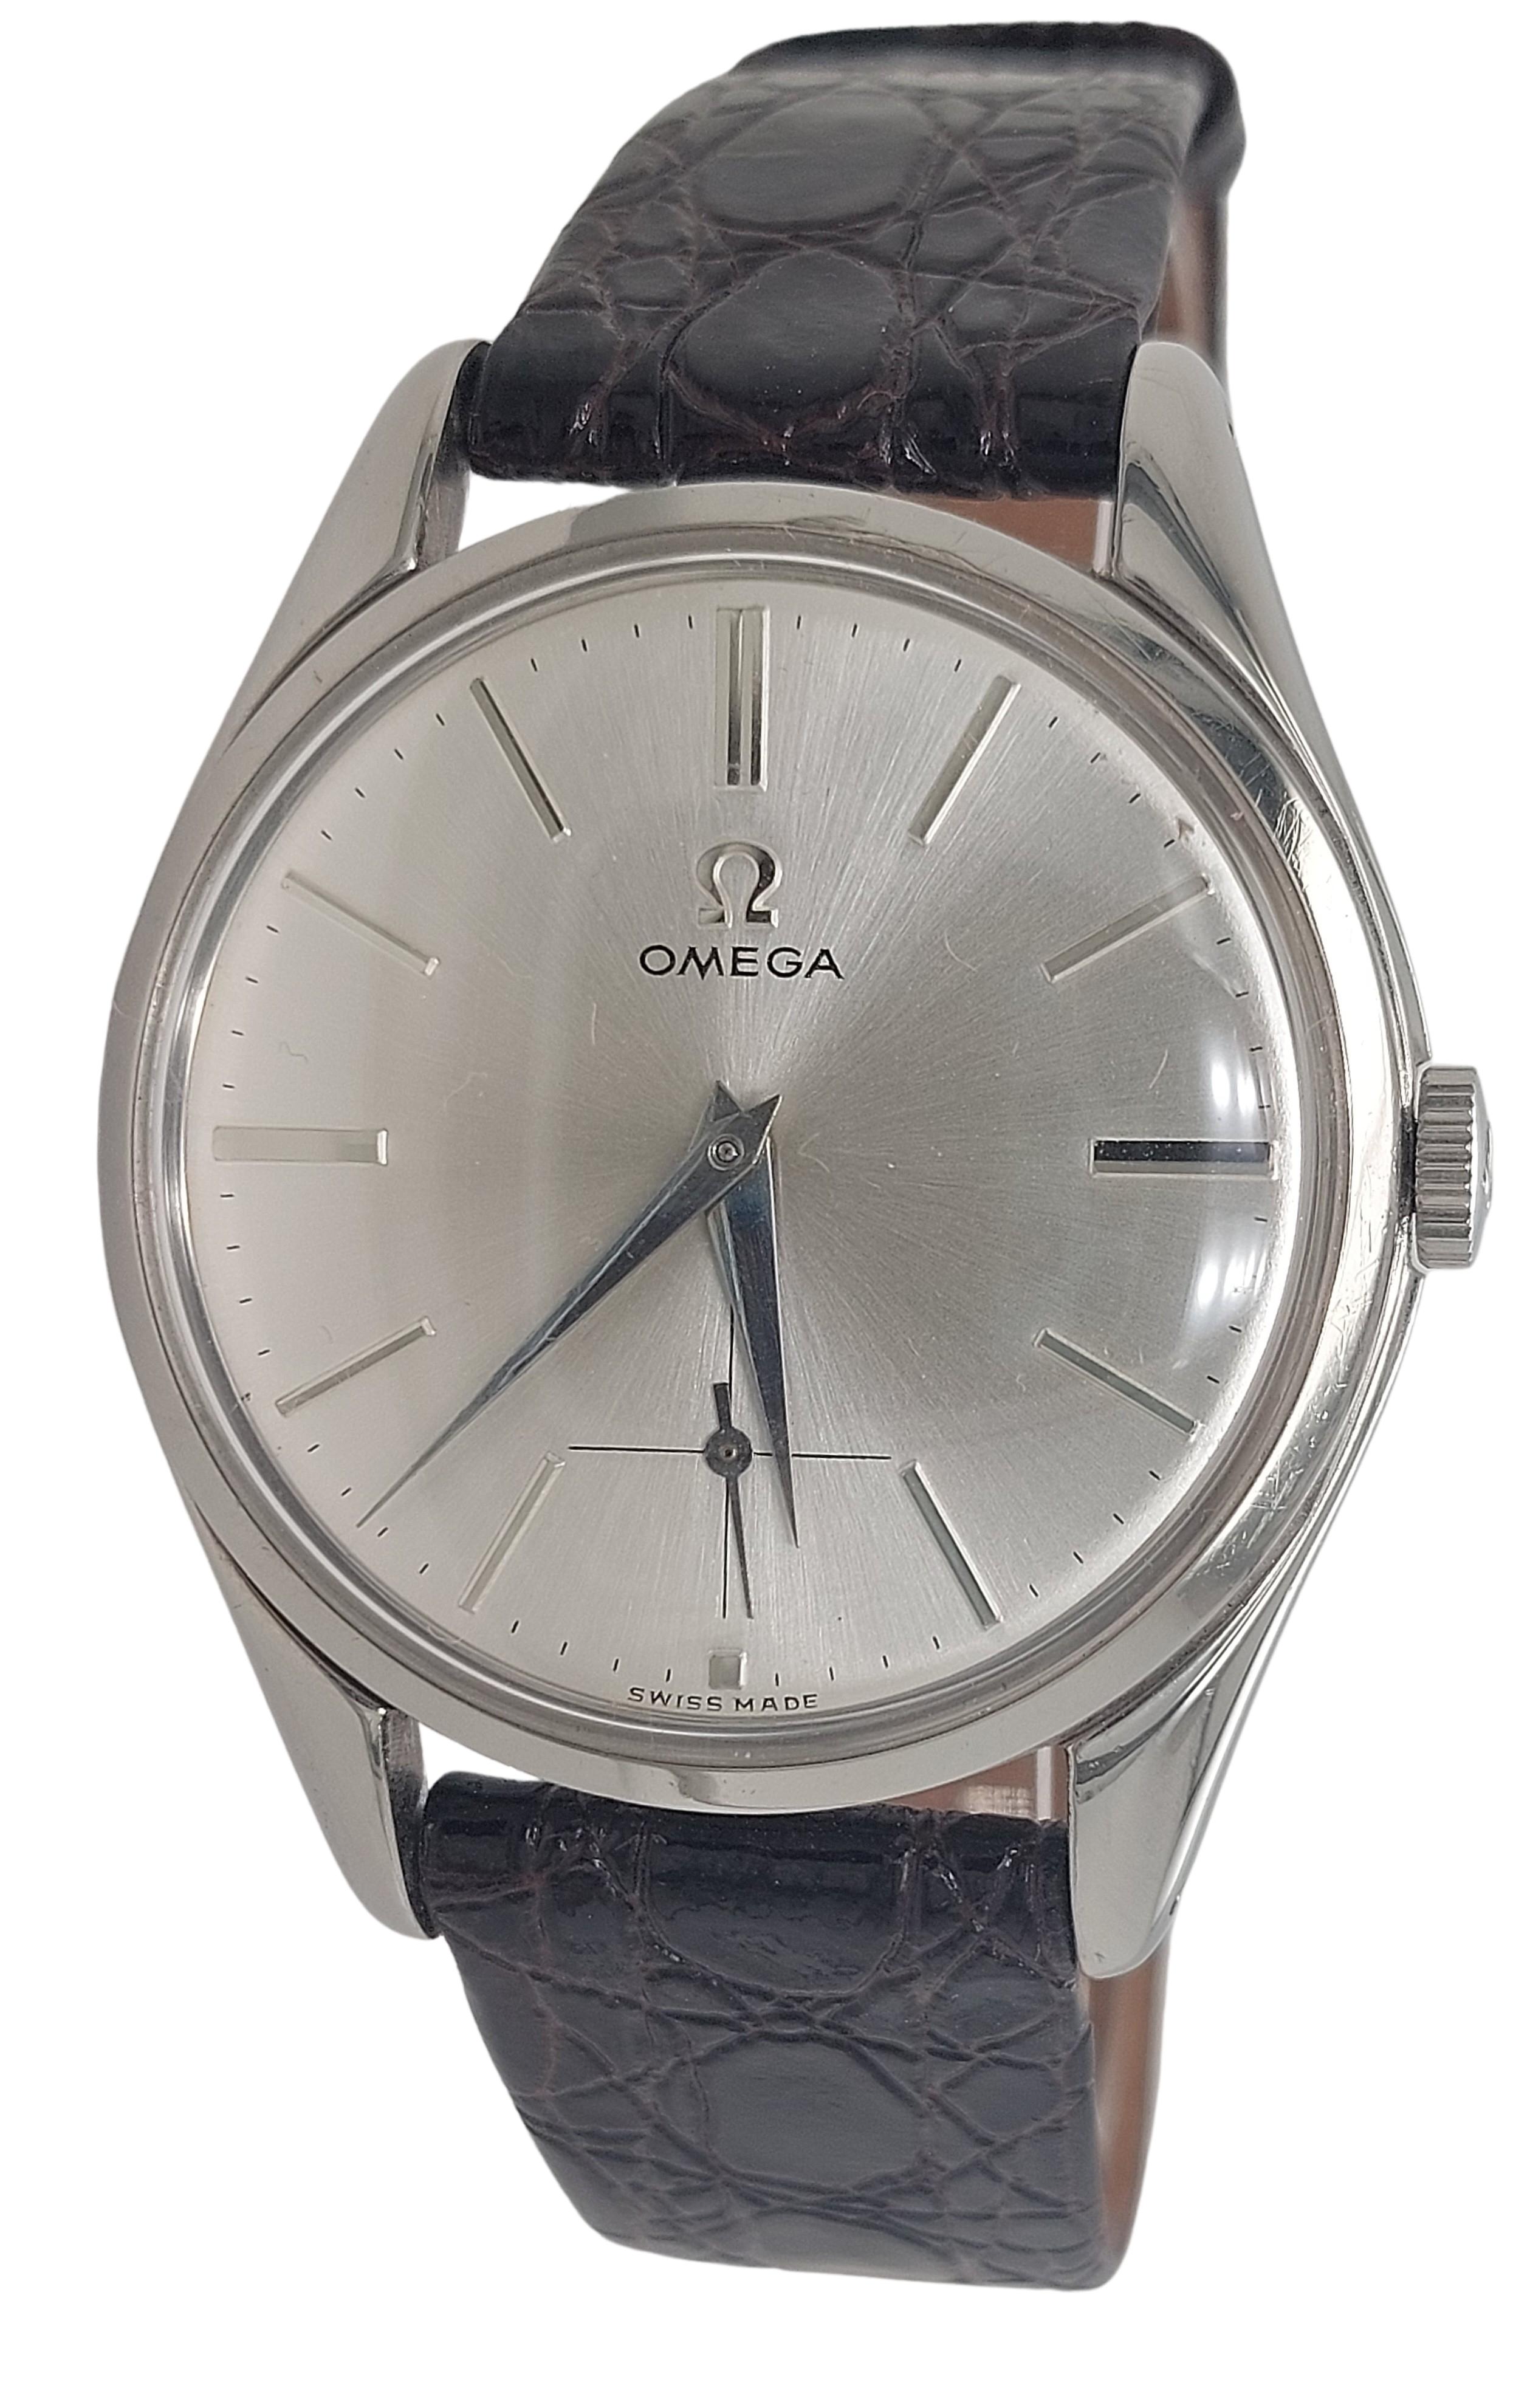 In Perfect Condition Stainless Steel Omega Calibre 265, Mechanical Movement

Calibre 265

Case: Stainless Steel, diameter 36 mm, thickness 9.5 mm, pressure closure case back

Dial: Silver dial ,steel indexes 

Strap: Brown leather strap , will max